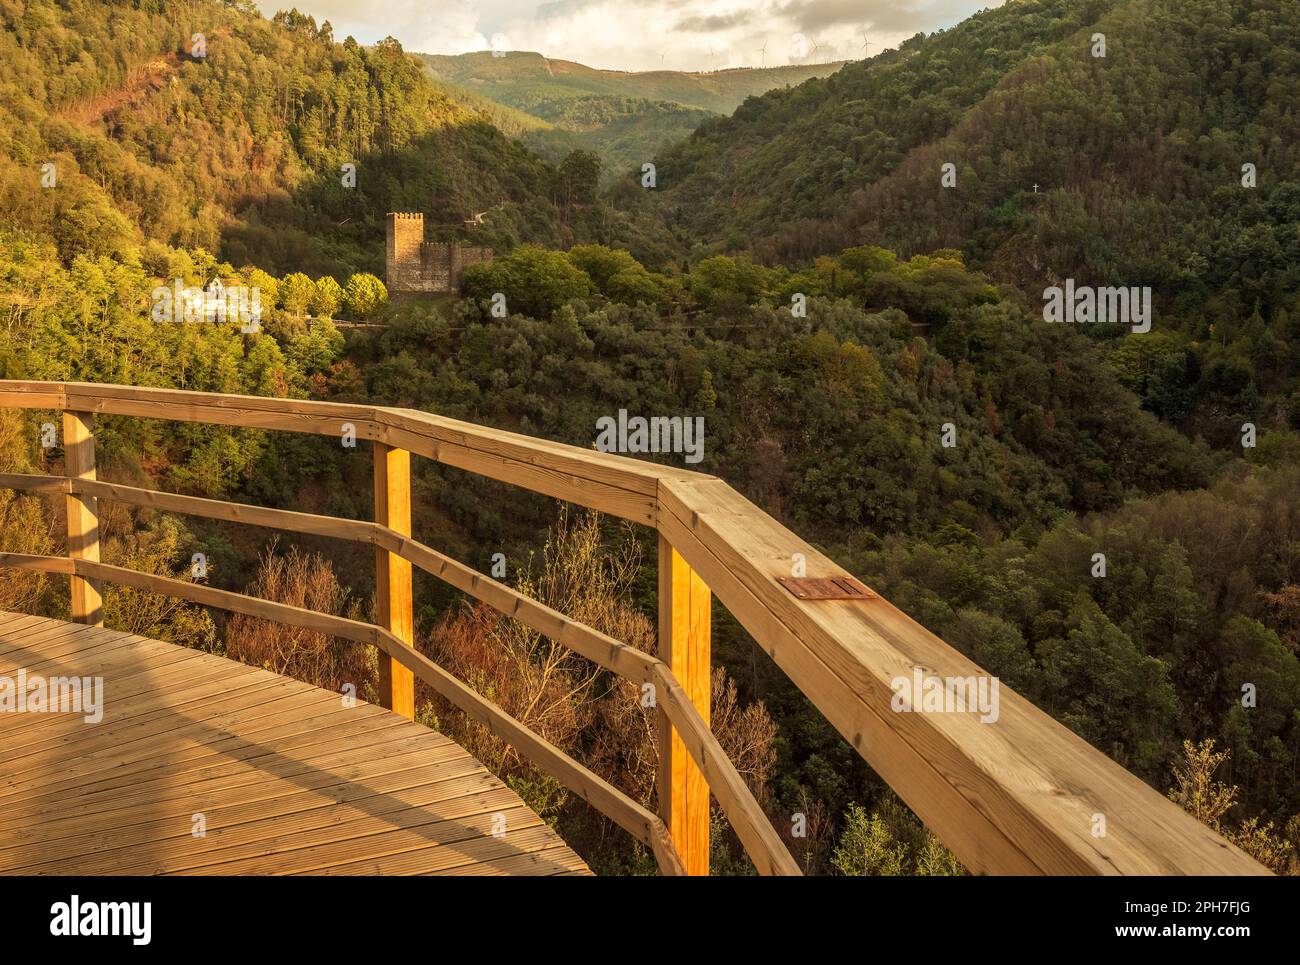 View of the Lousã walkways, in Portugal, with the castle and the mountains in the background. Stock Photo